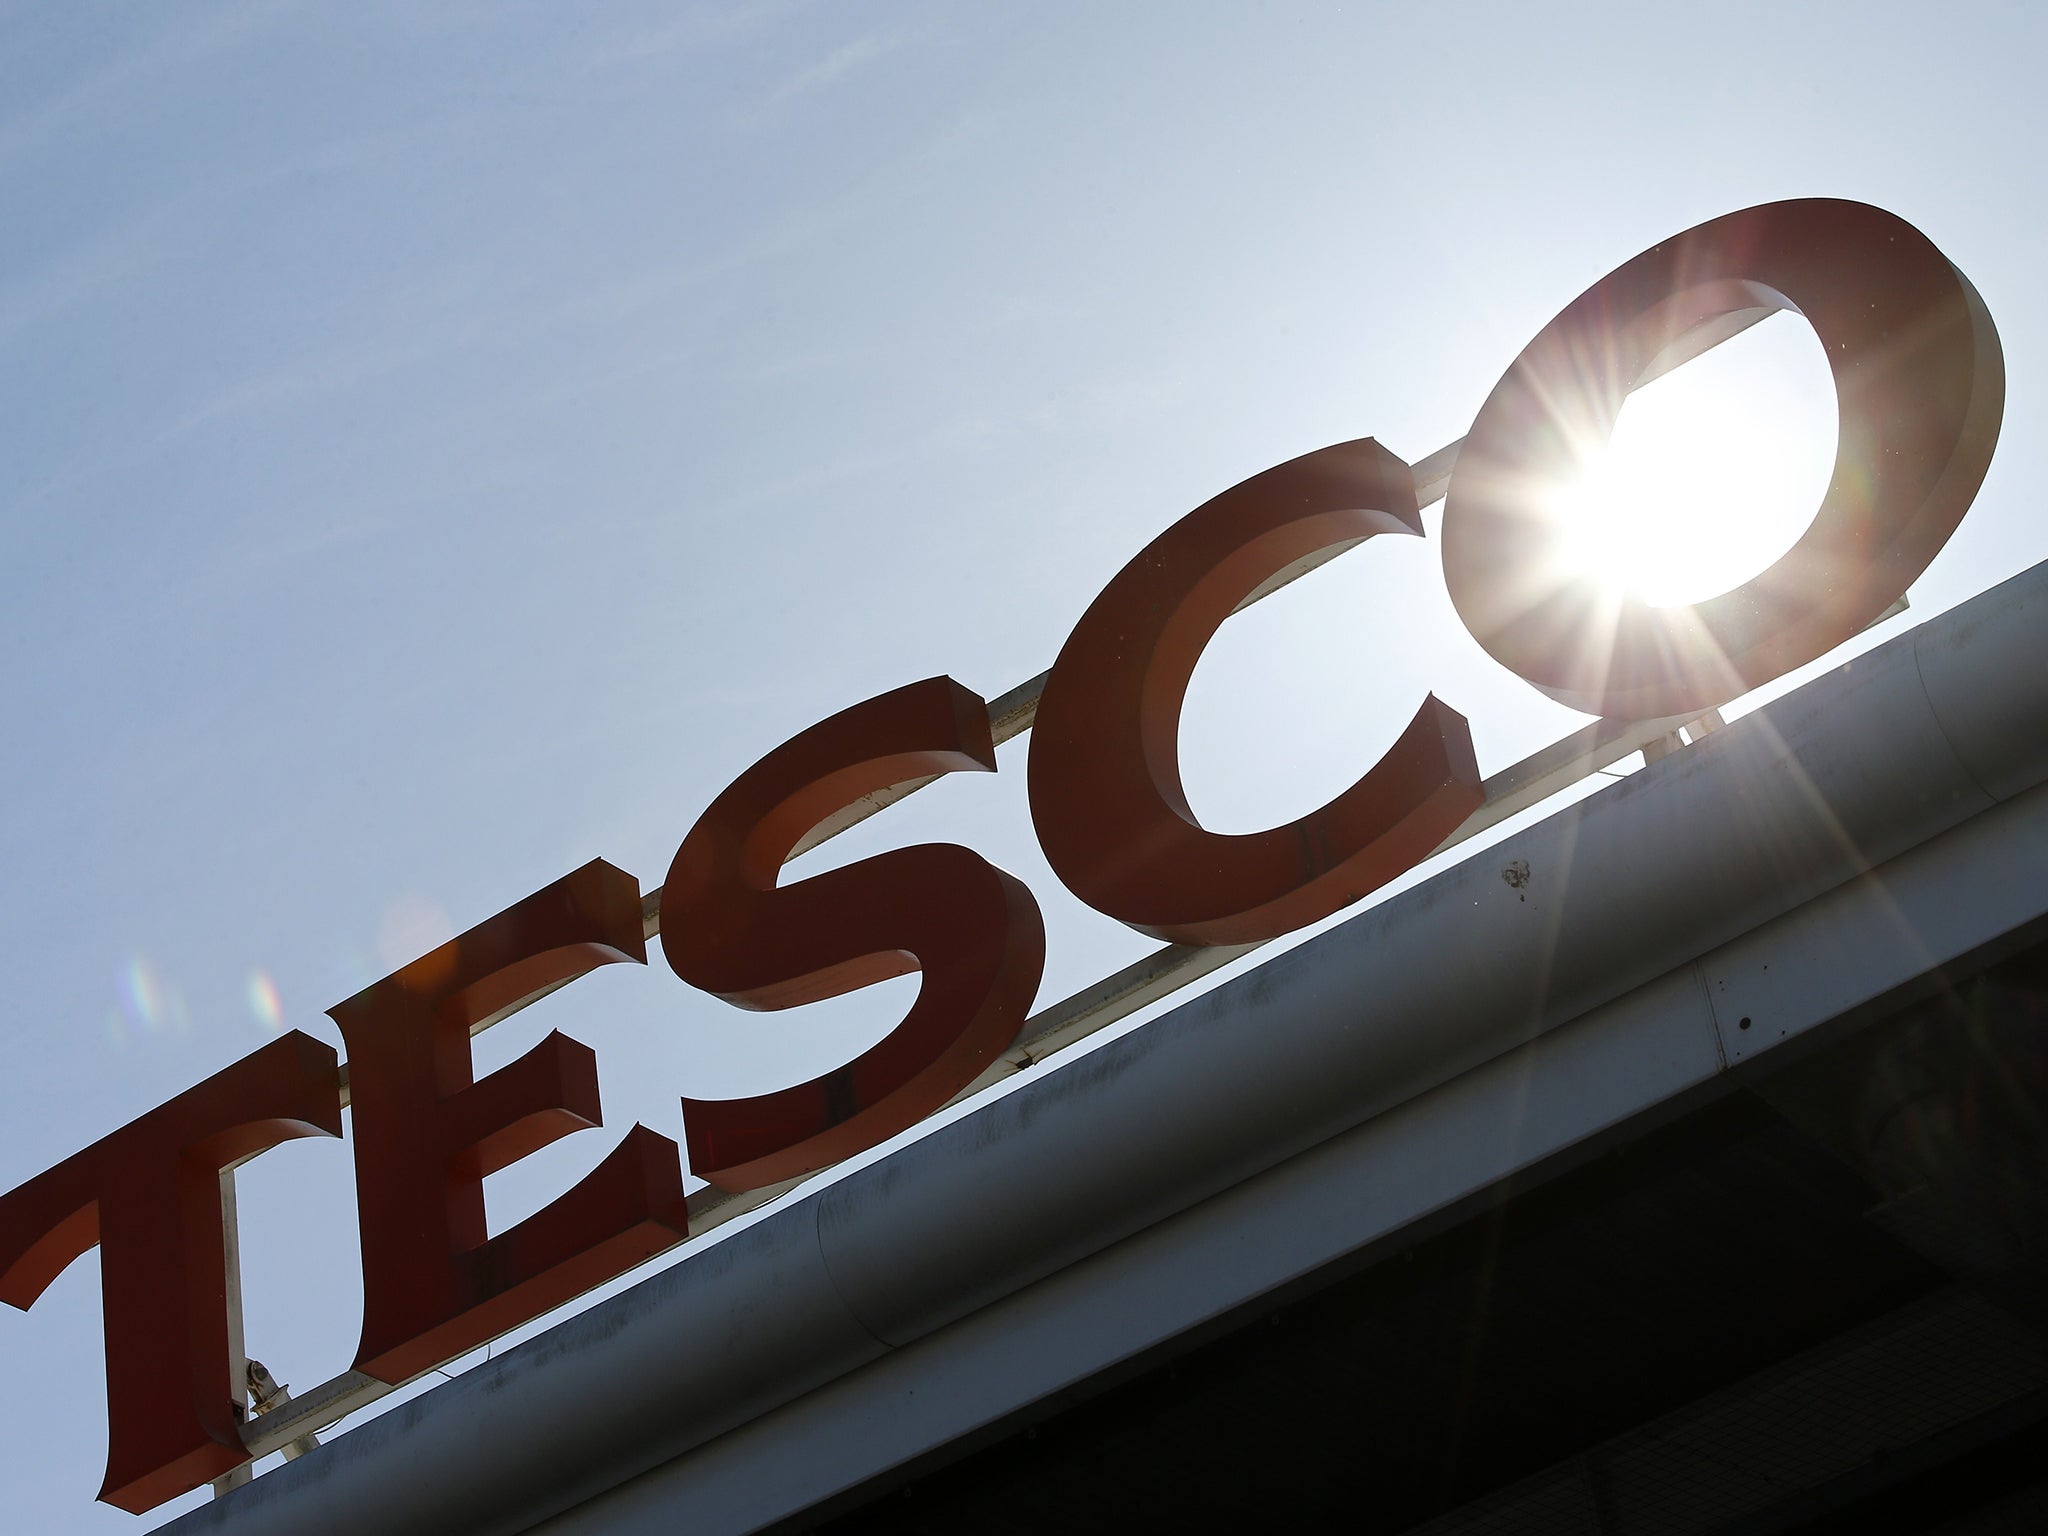 Tesco said it will continue to offer customers home and garden products through its own stores and online